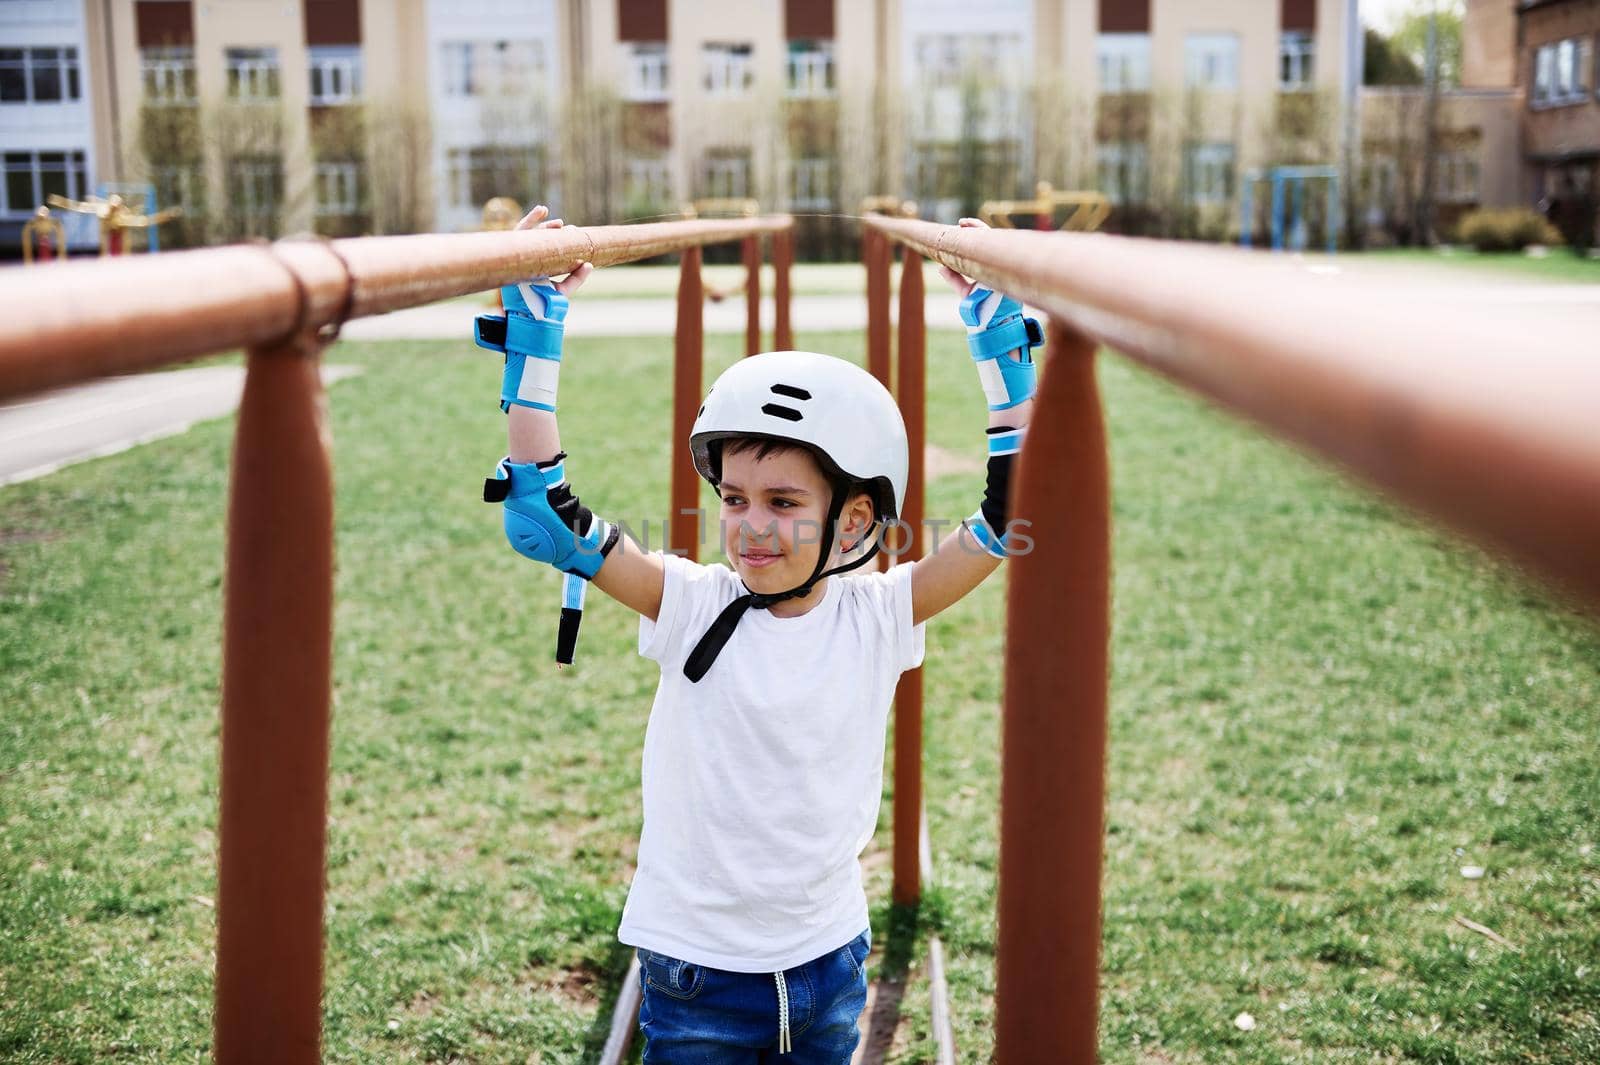 Handsome boy in safety helmet and protective gear between horizontal bars on playground outdoors. by artgf